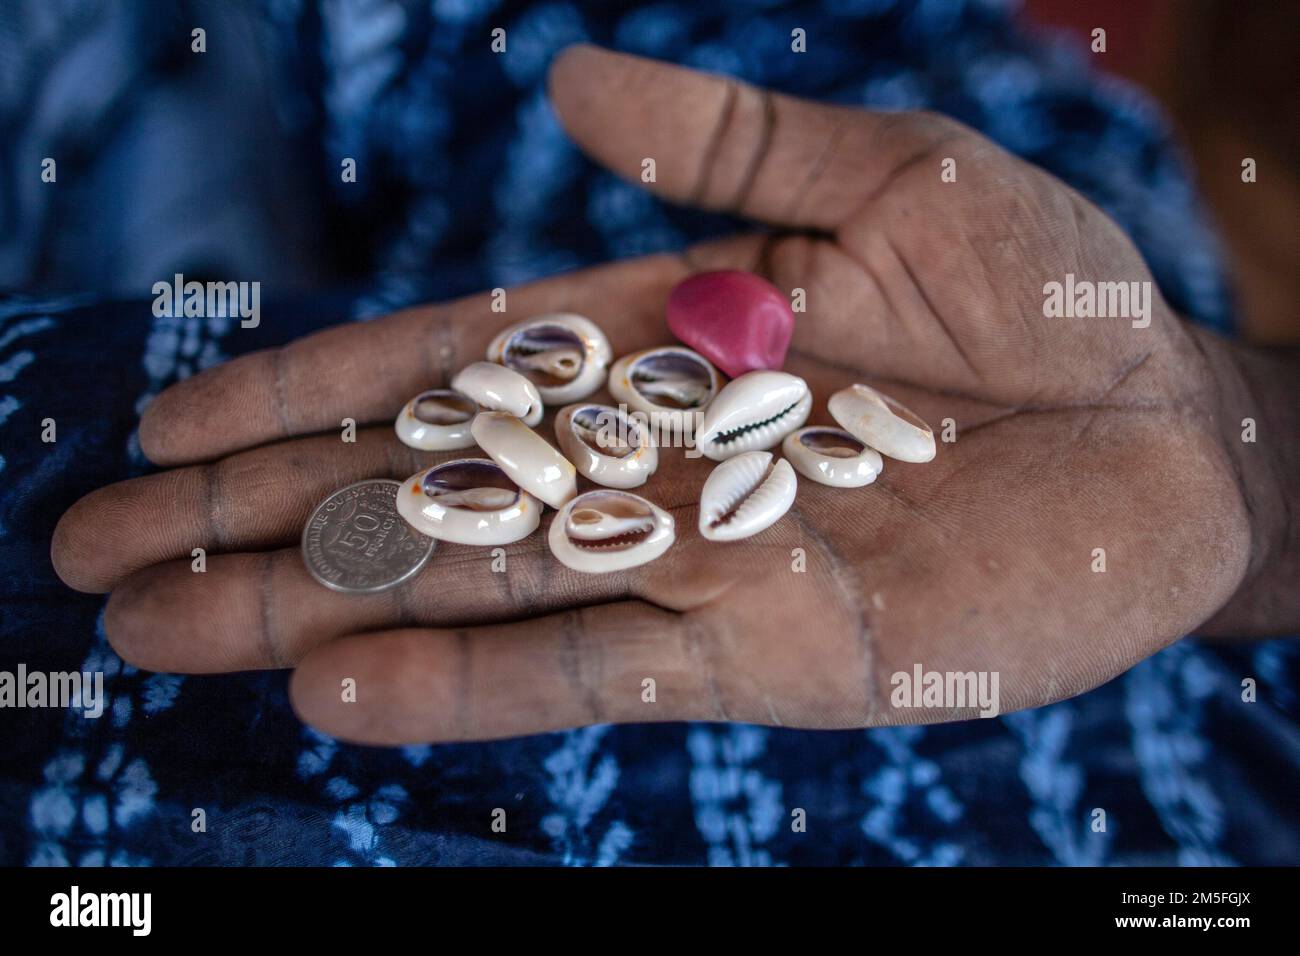 Cowrie shells are part of rituals in Africa. Cowrie shells became a popular tool in divination ceremonies. Stock Photo